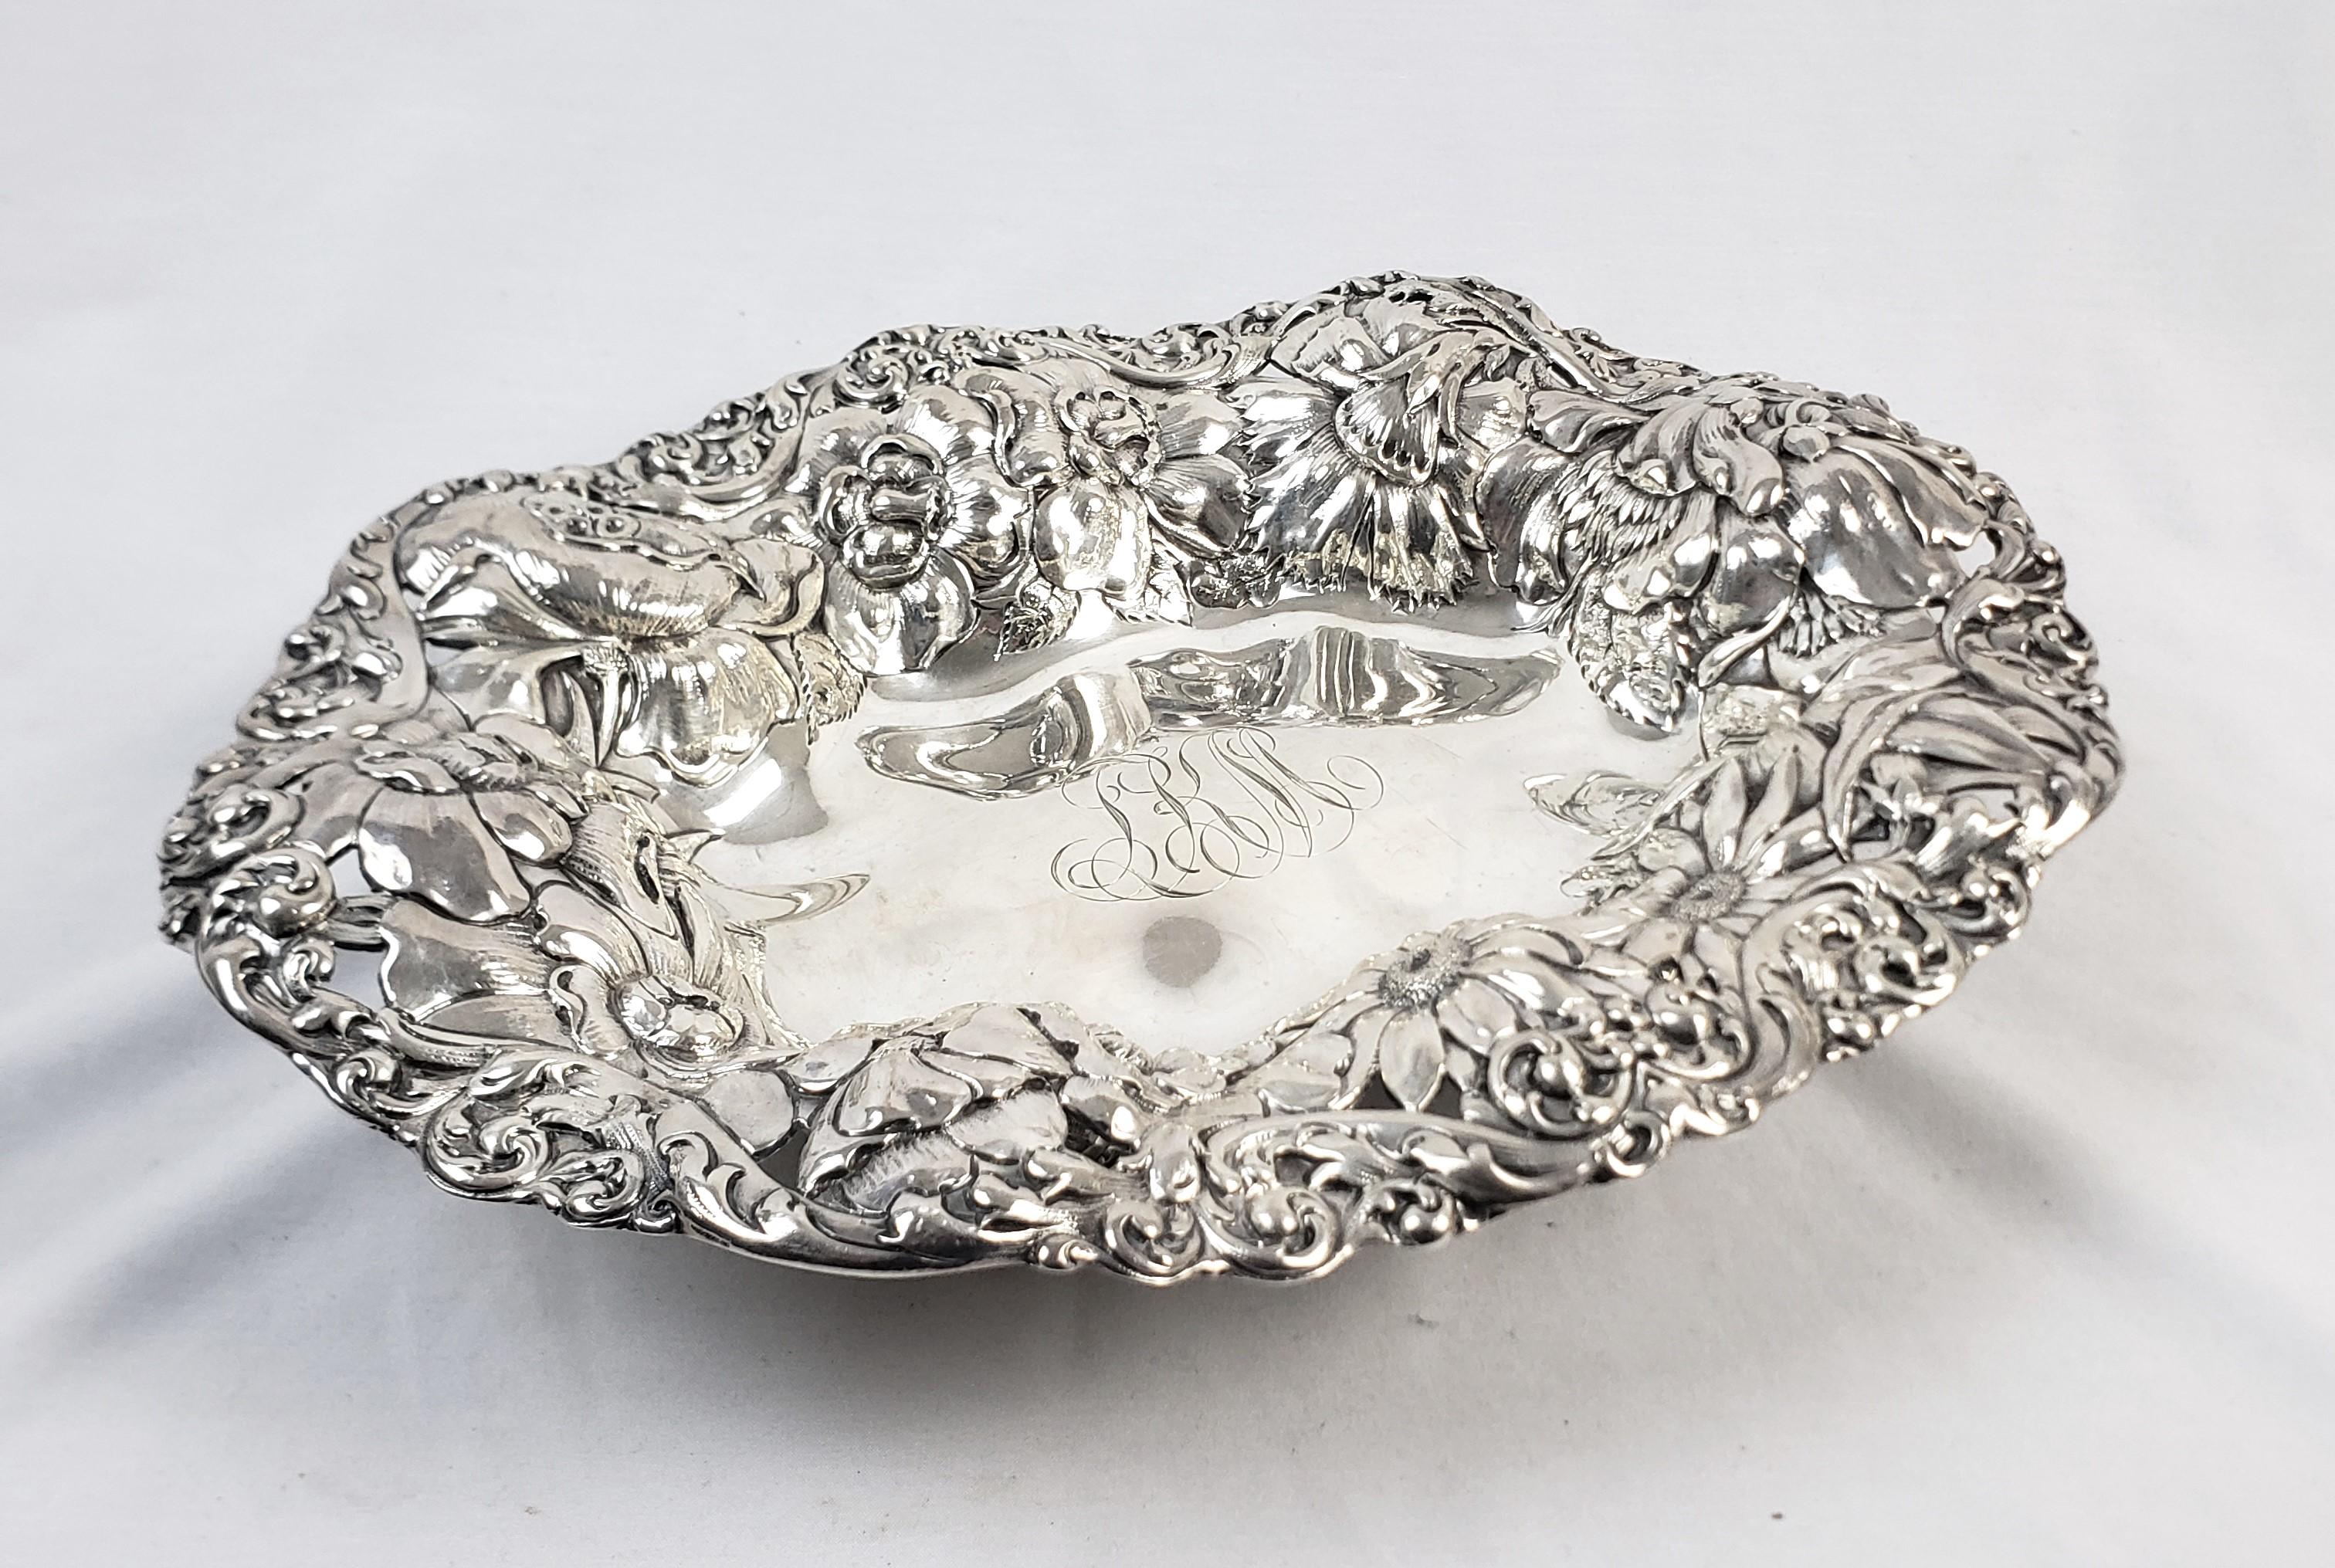 This antique bowl was made by the renowed Gorham Company of the United States and dates to approximately 1900 and done in a Victorian style. The bowl is composed of sterling silver and features an ornately pierced and chased floral rim. The bowl is